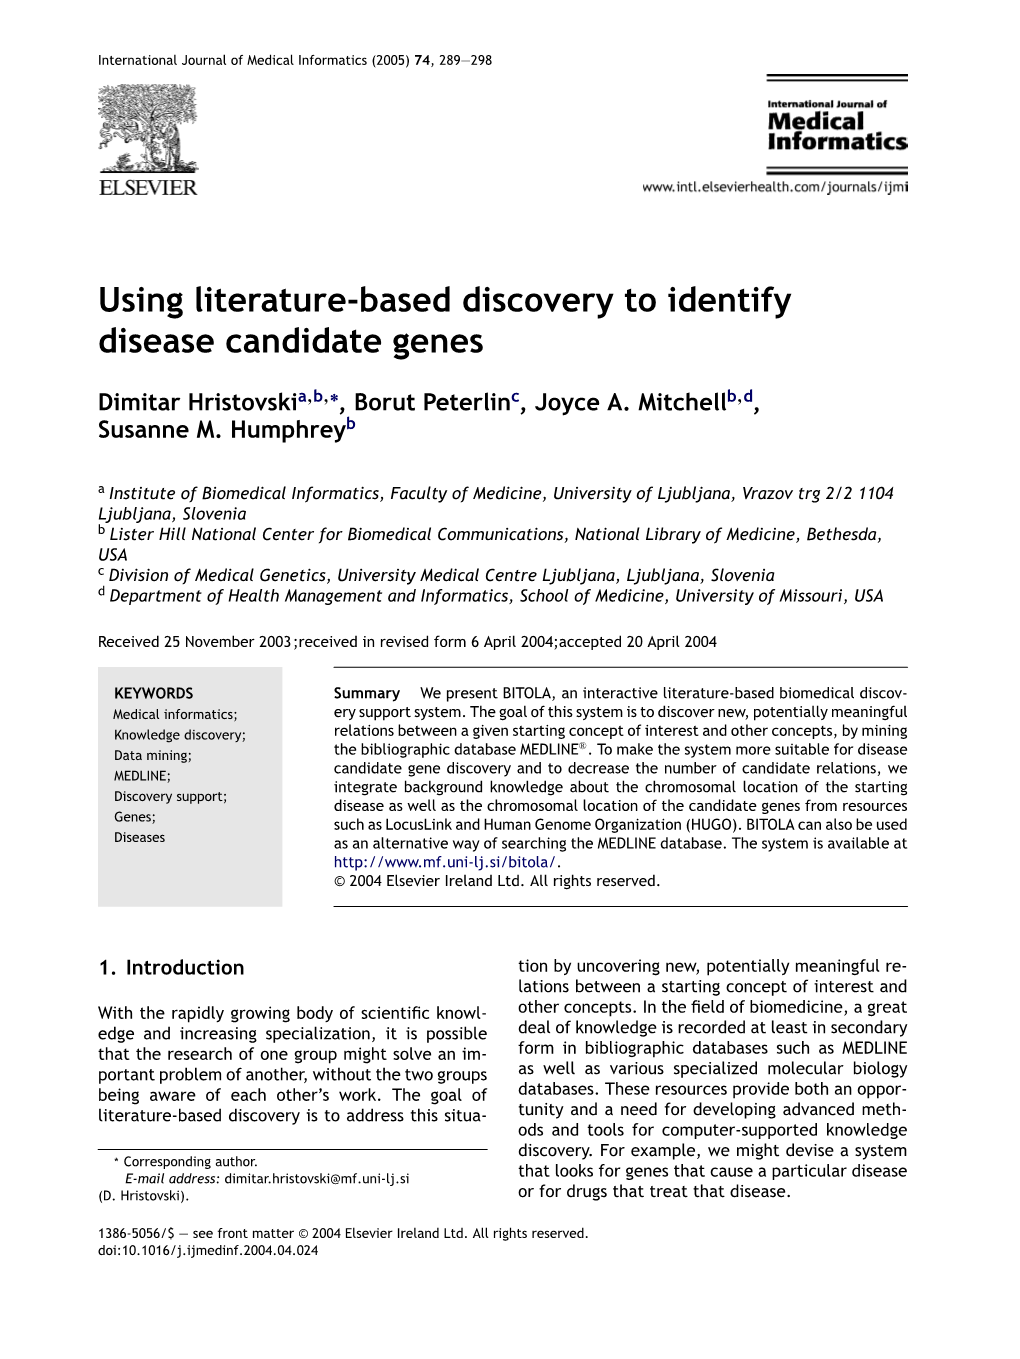 Using Literature-Based Discovery to Identify Disease Candidate Genes